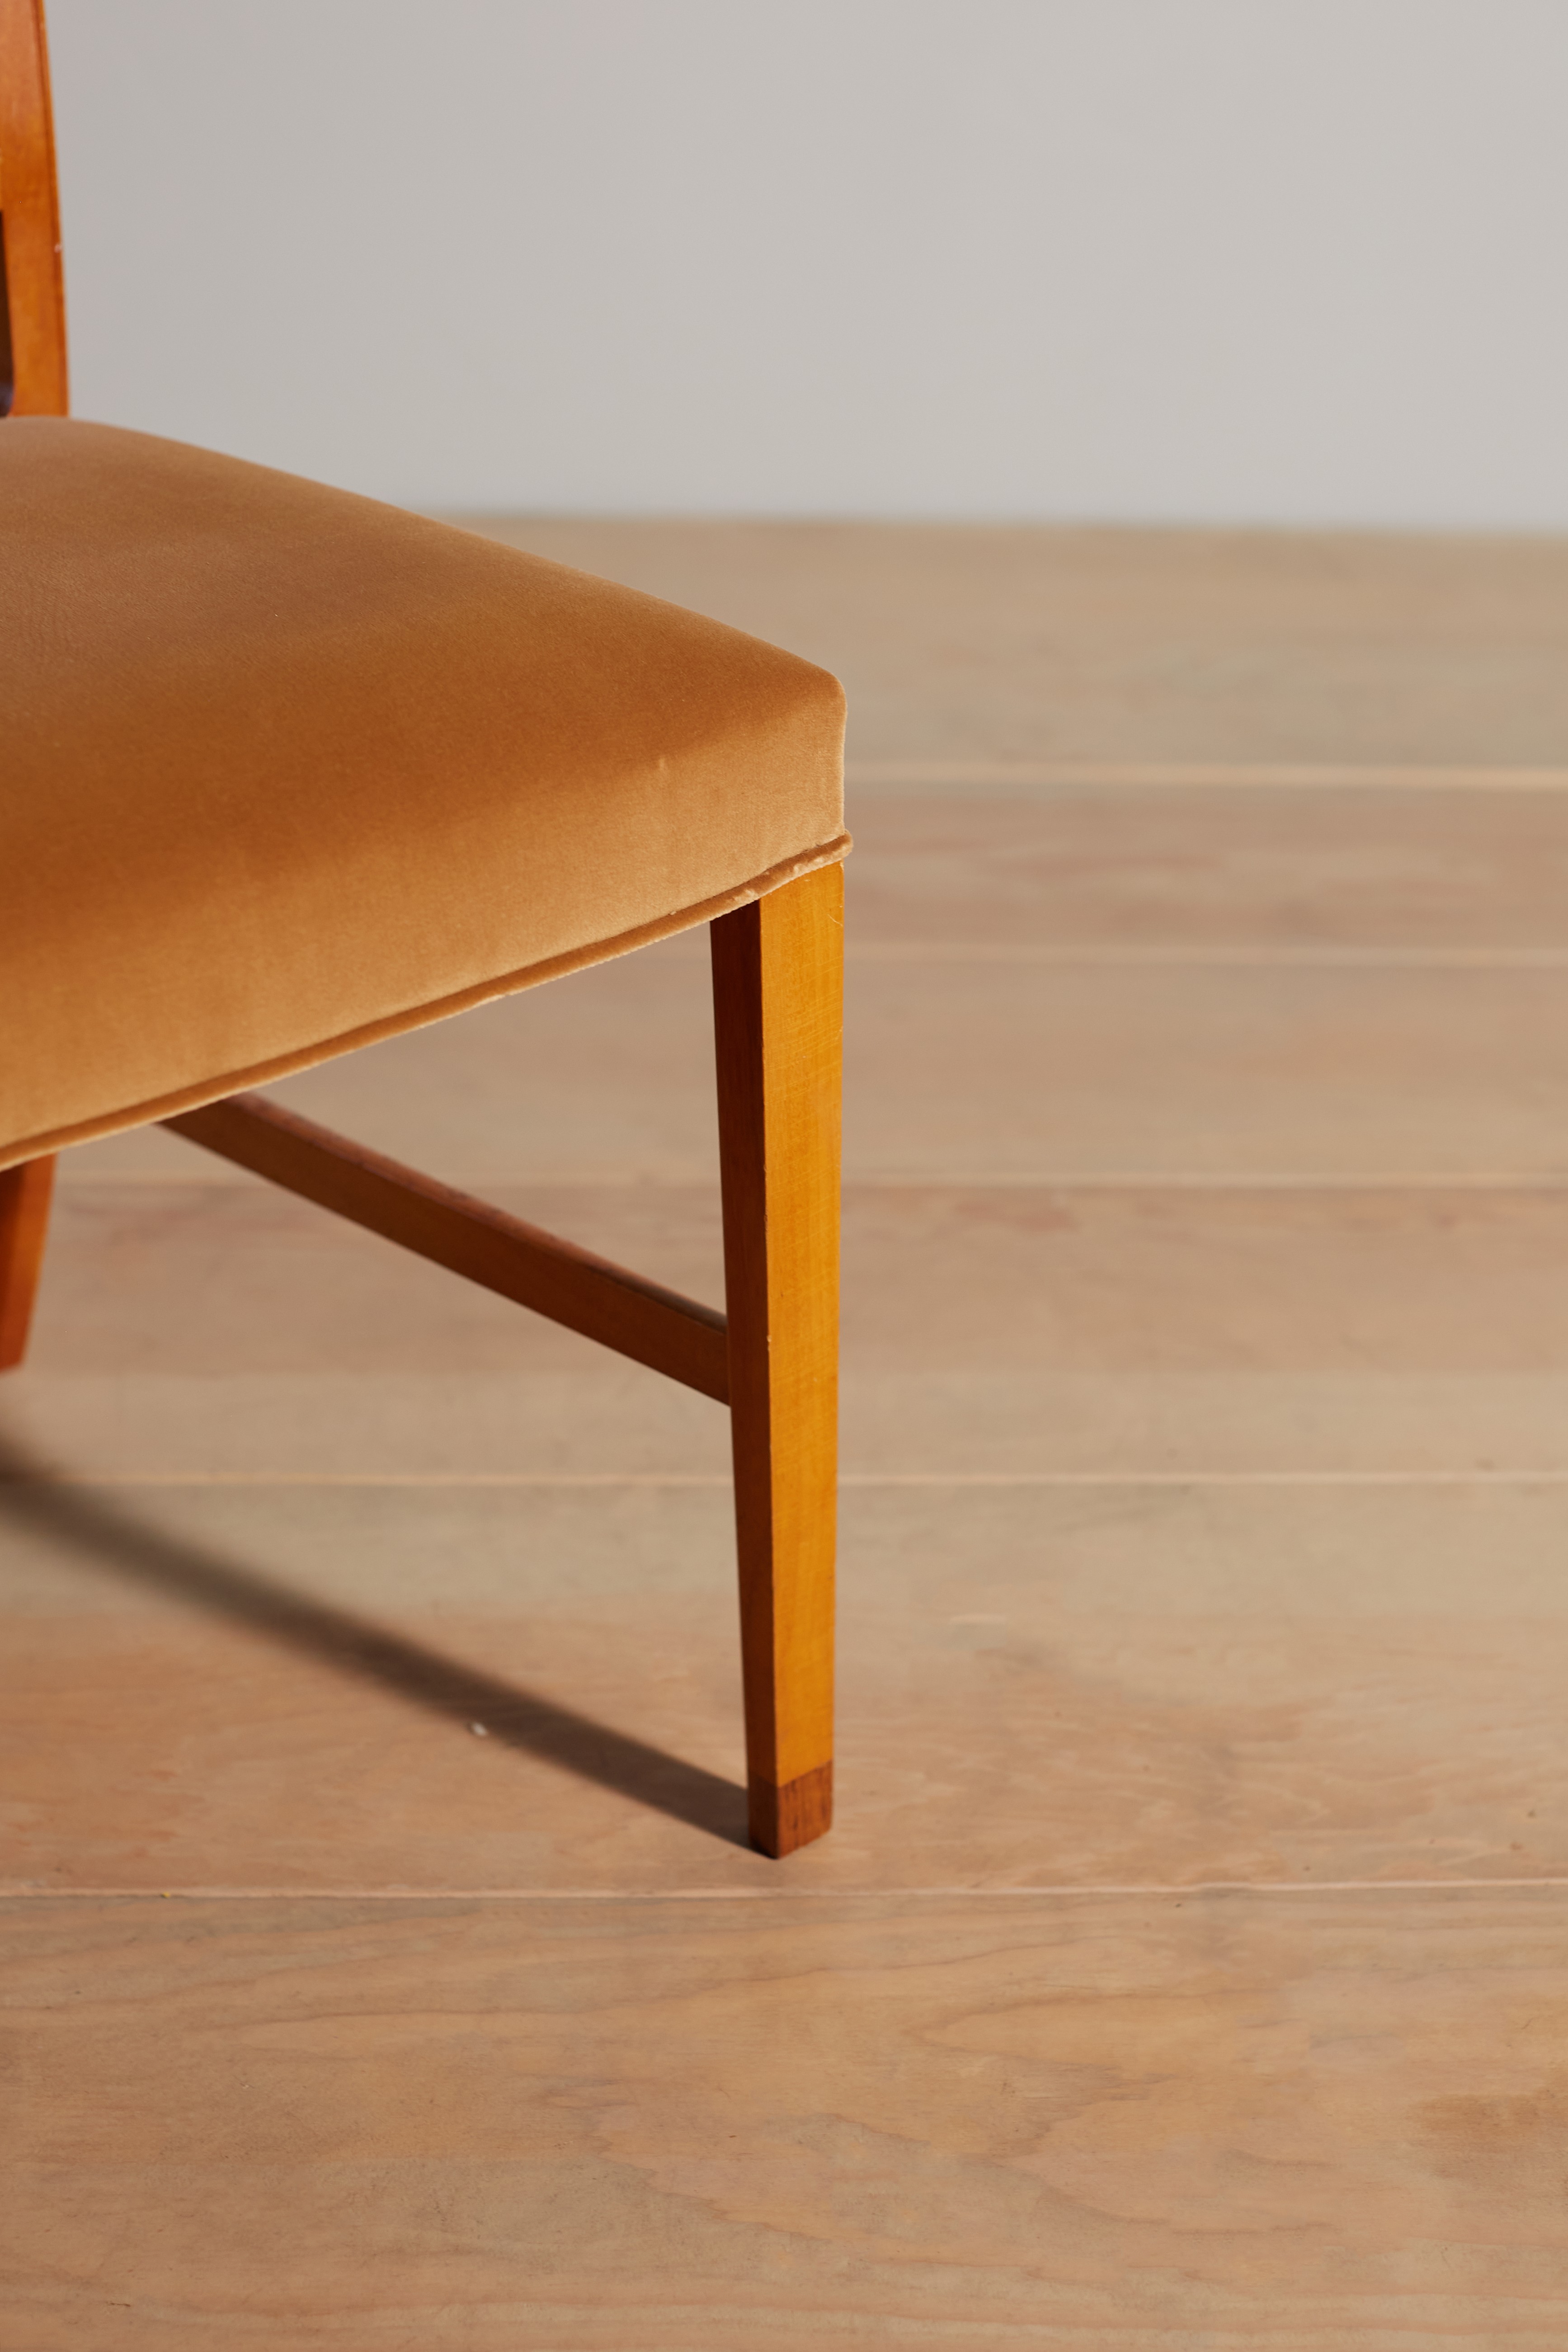 a wooden chair sitting on top of a hard wood floor